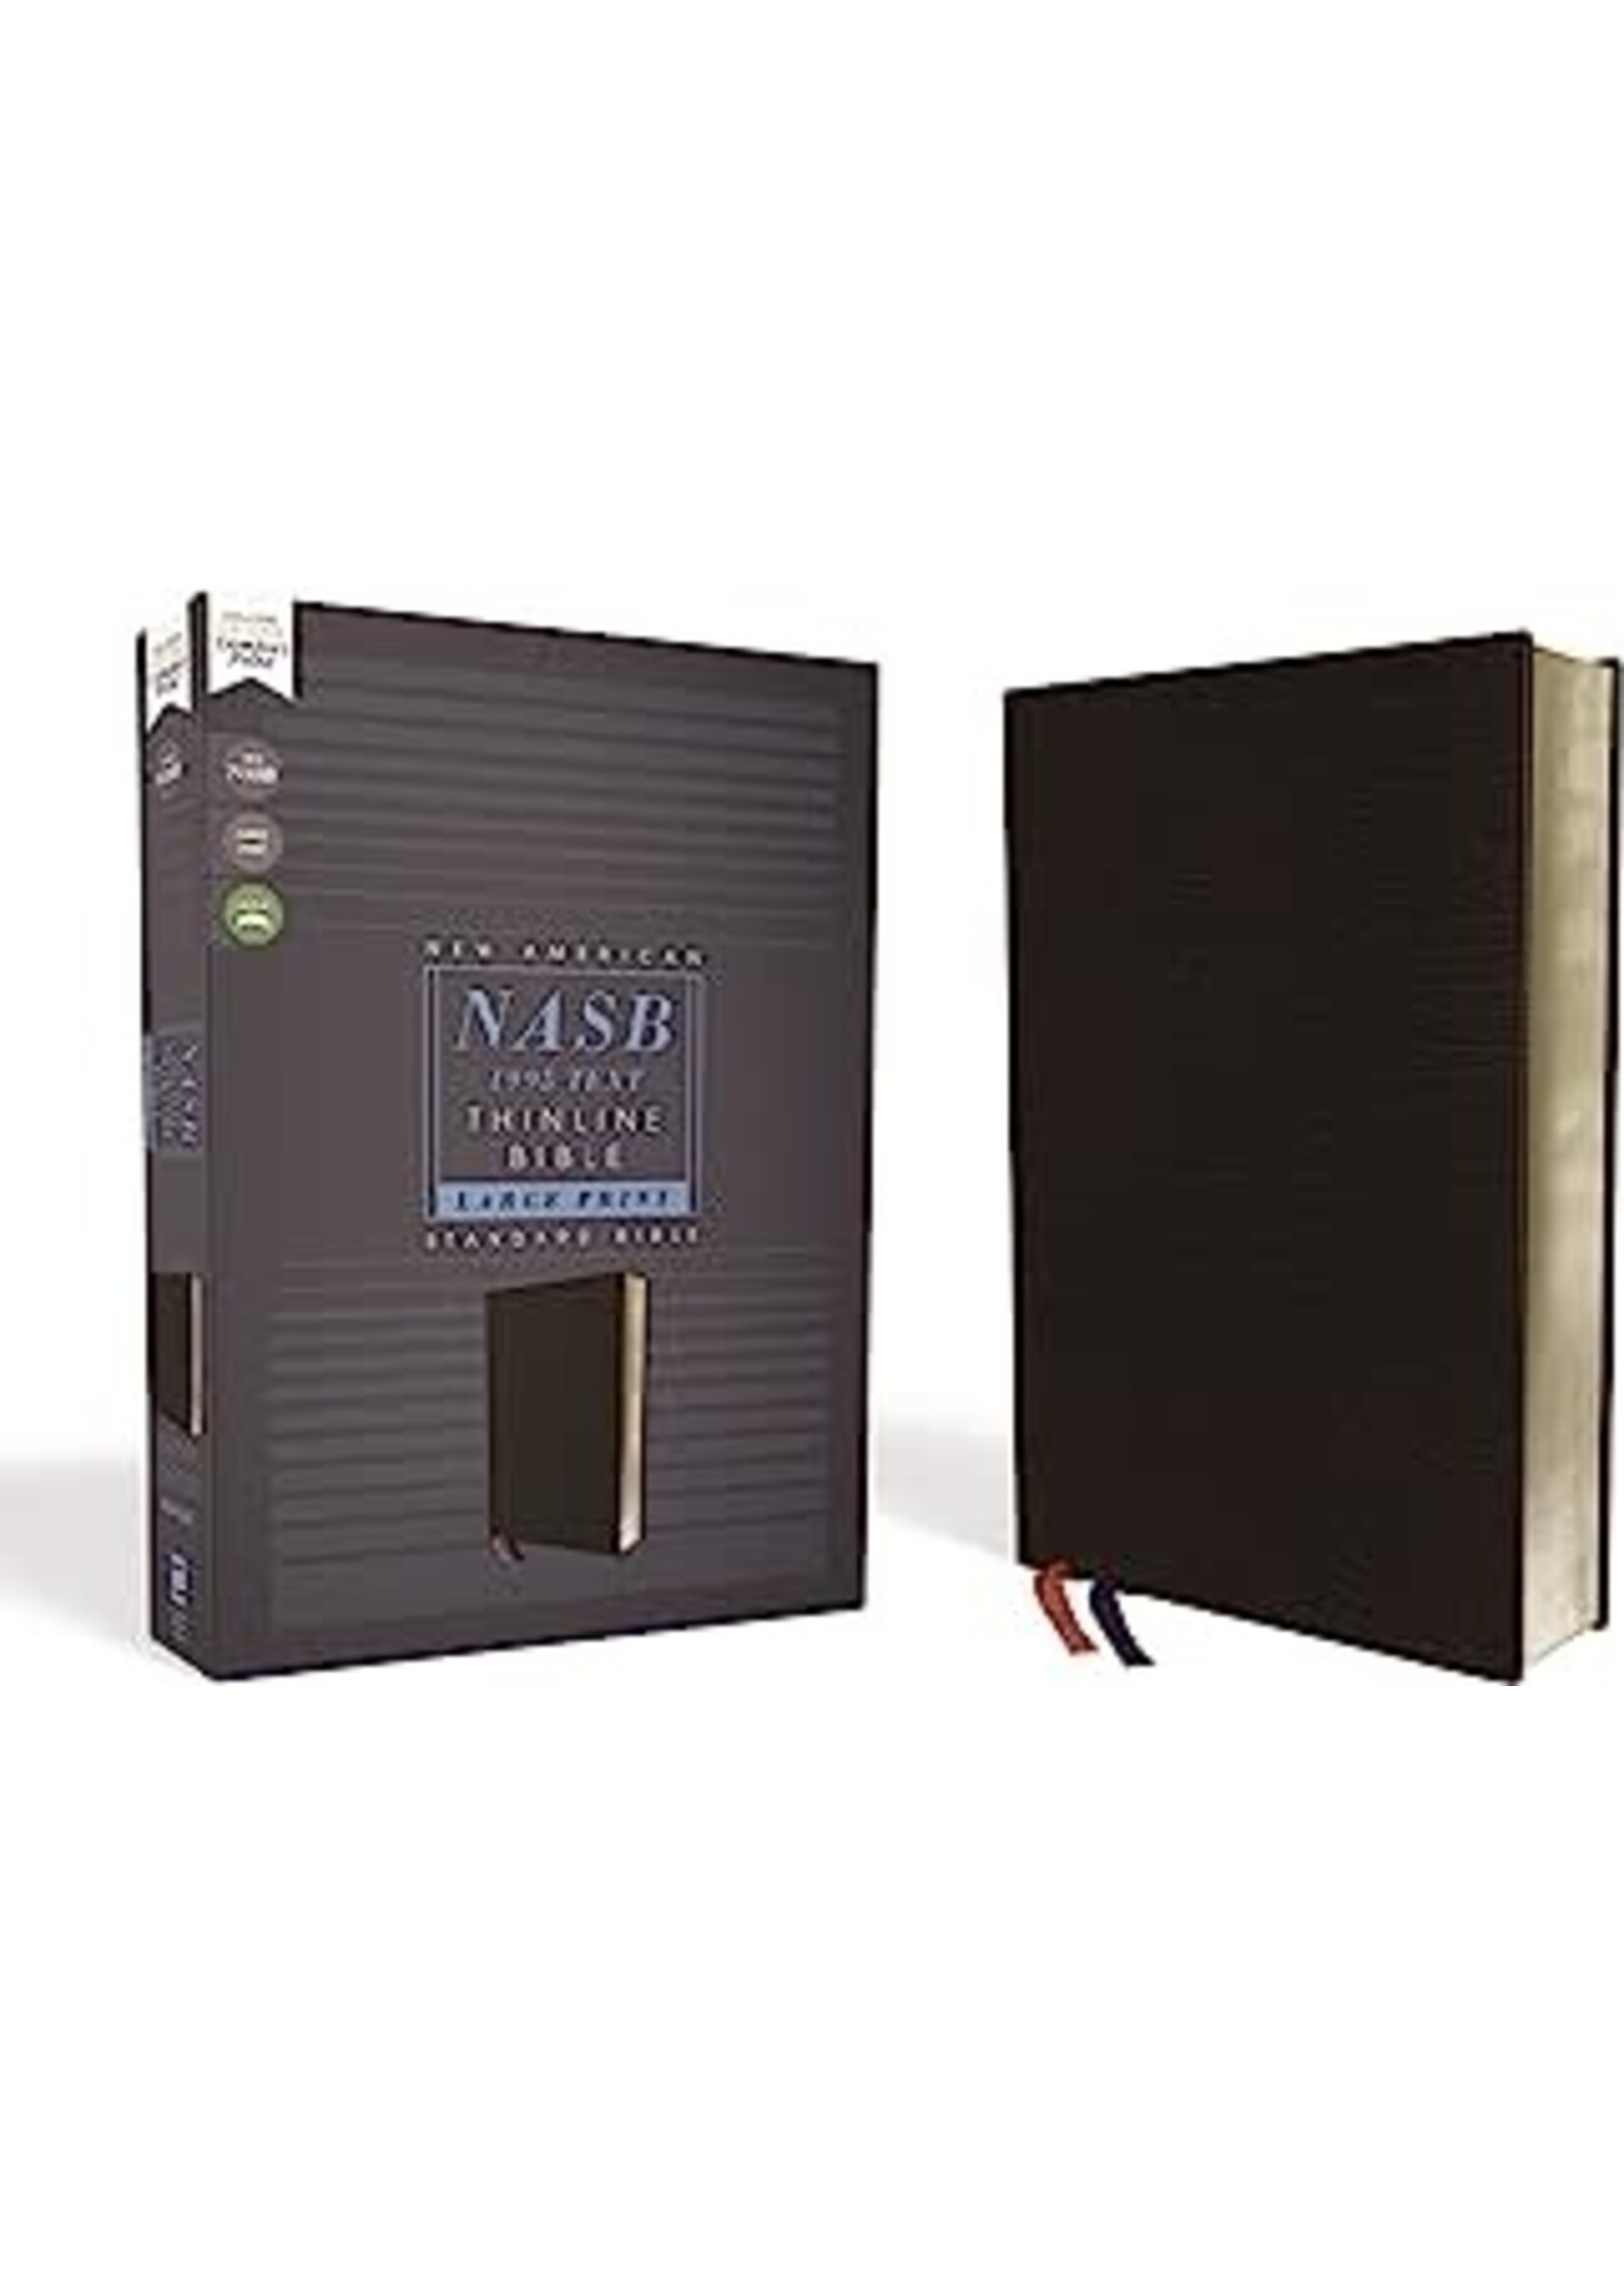 NASB, Thinline Bible, Large Print, Bonded Leather, Black, Red Letter Edition, 1995 Text, Comfort Print